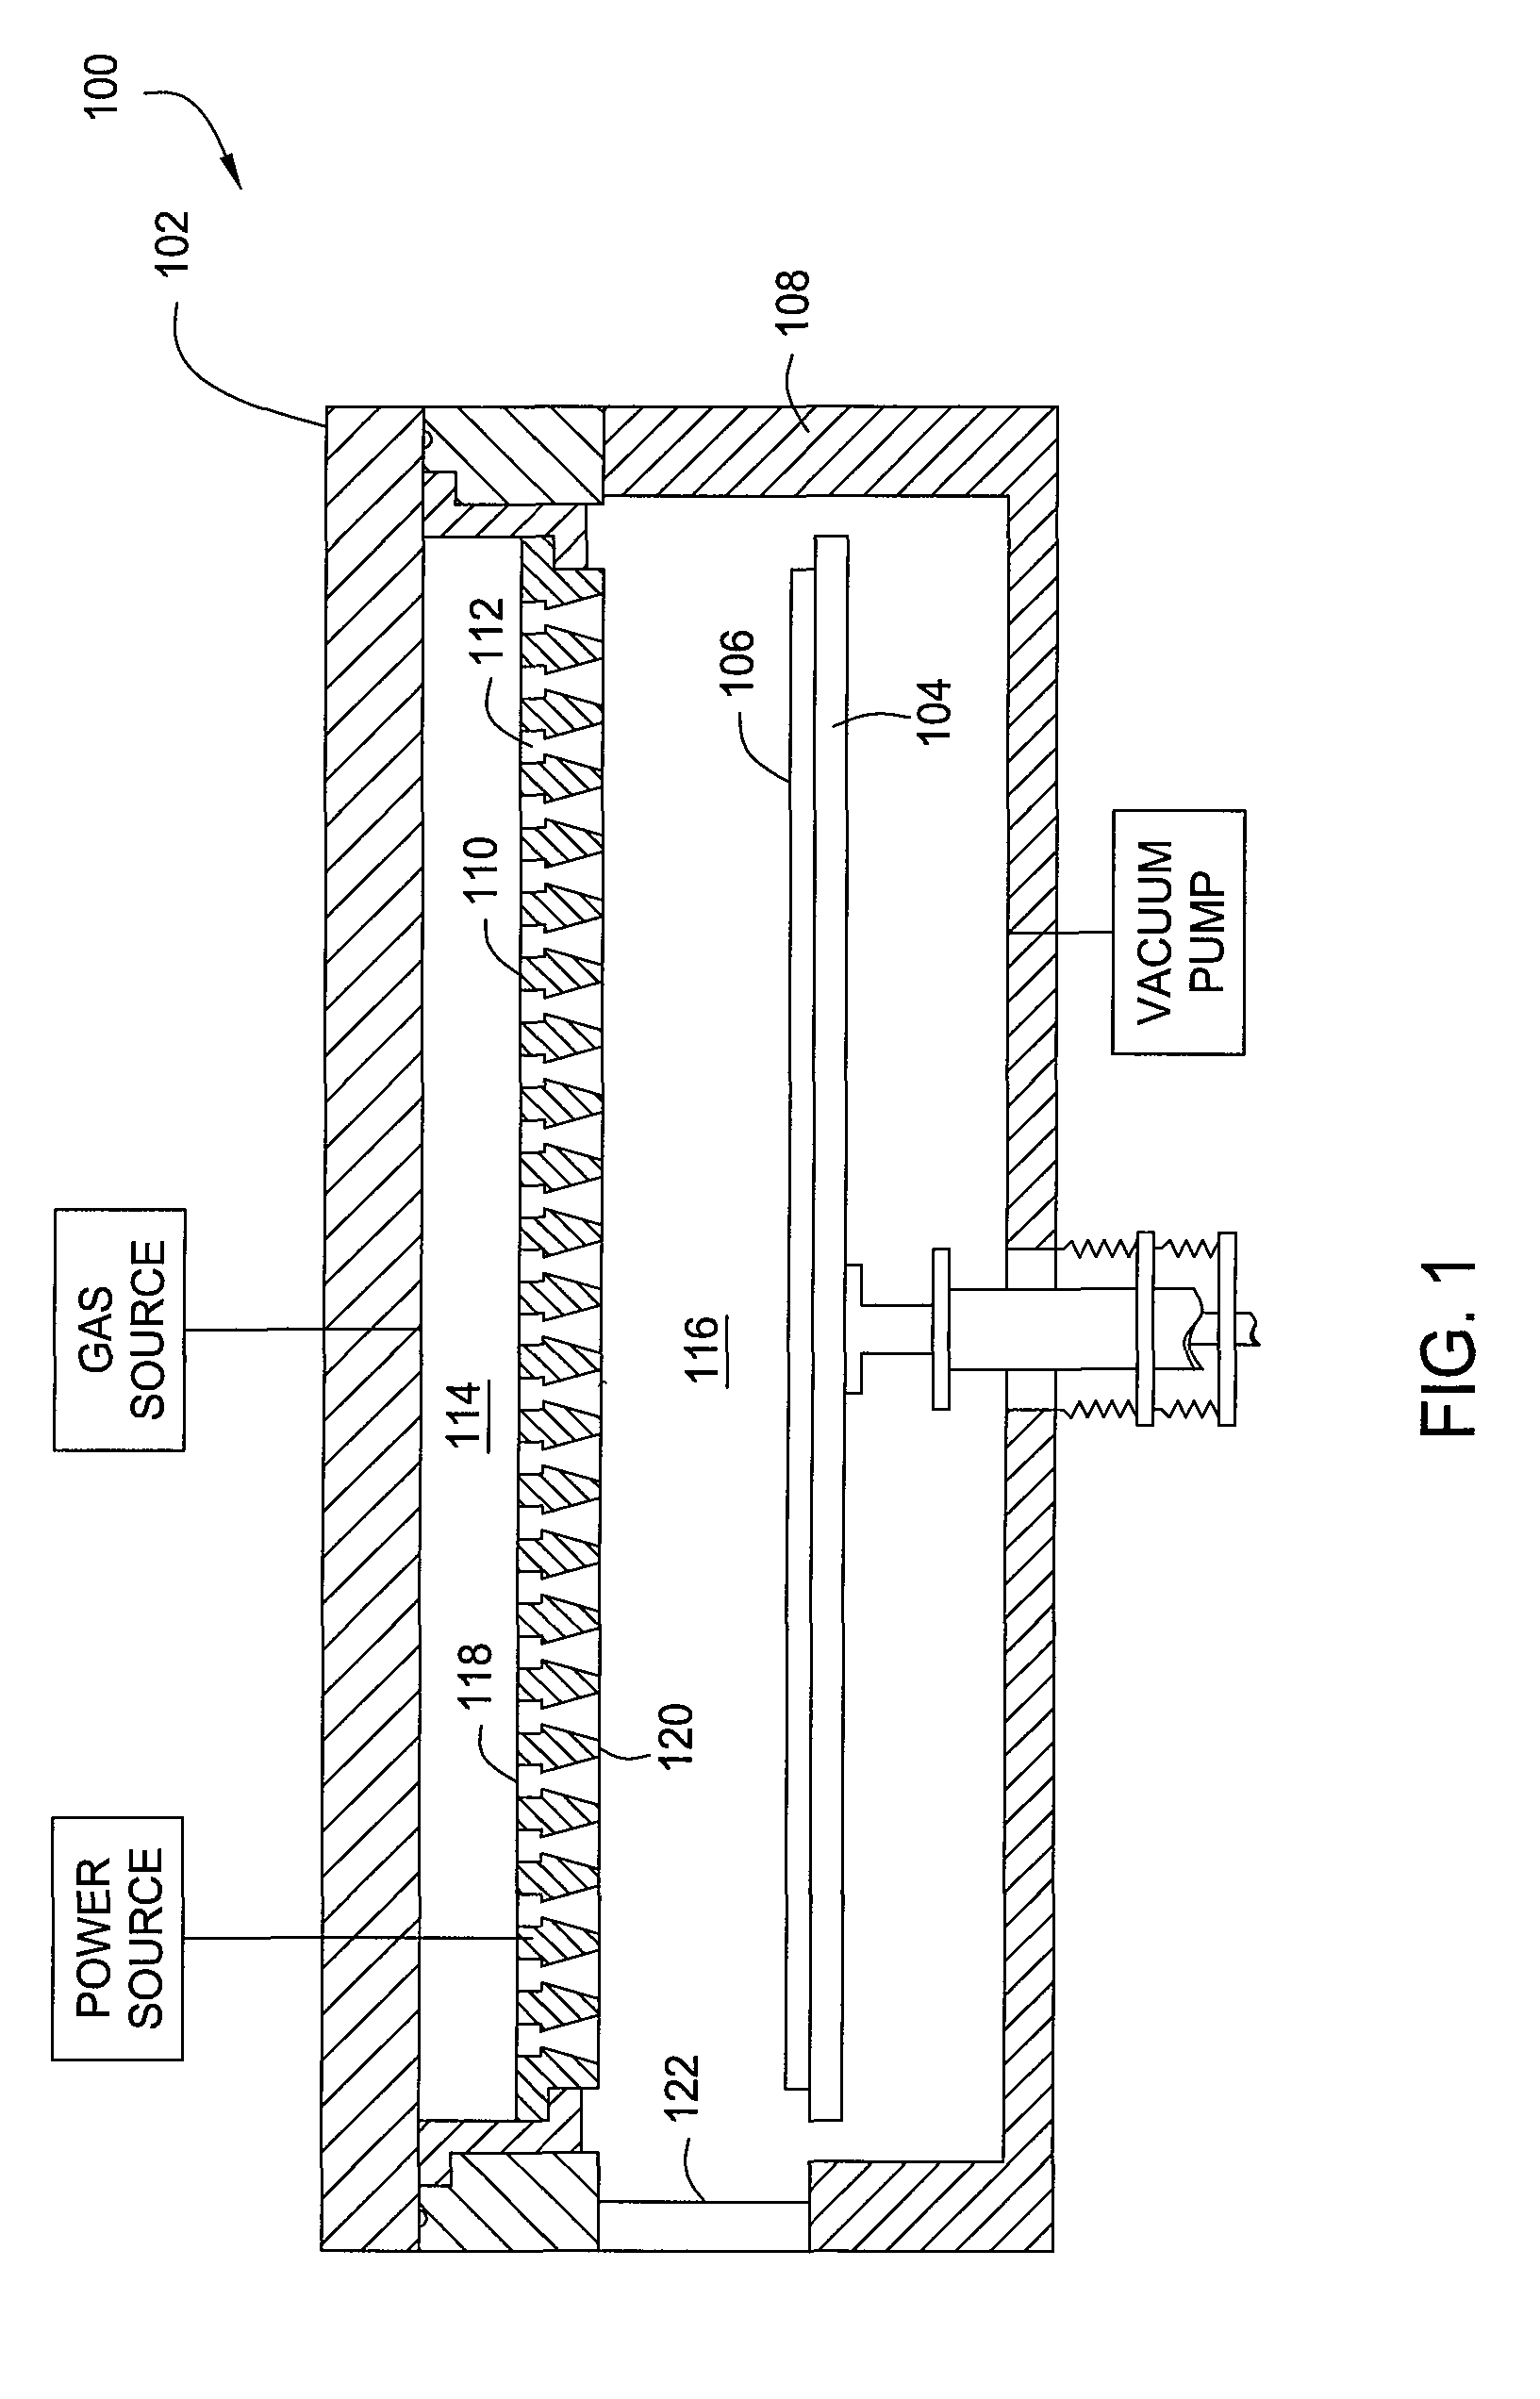 Diffuser plate with slit valve compensation